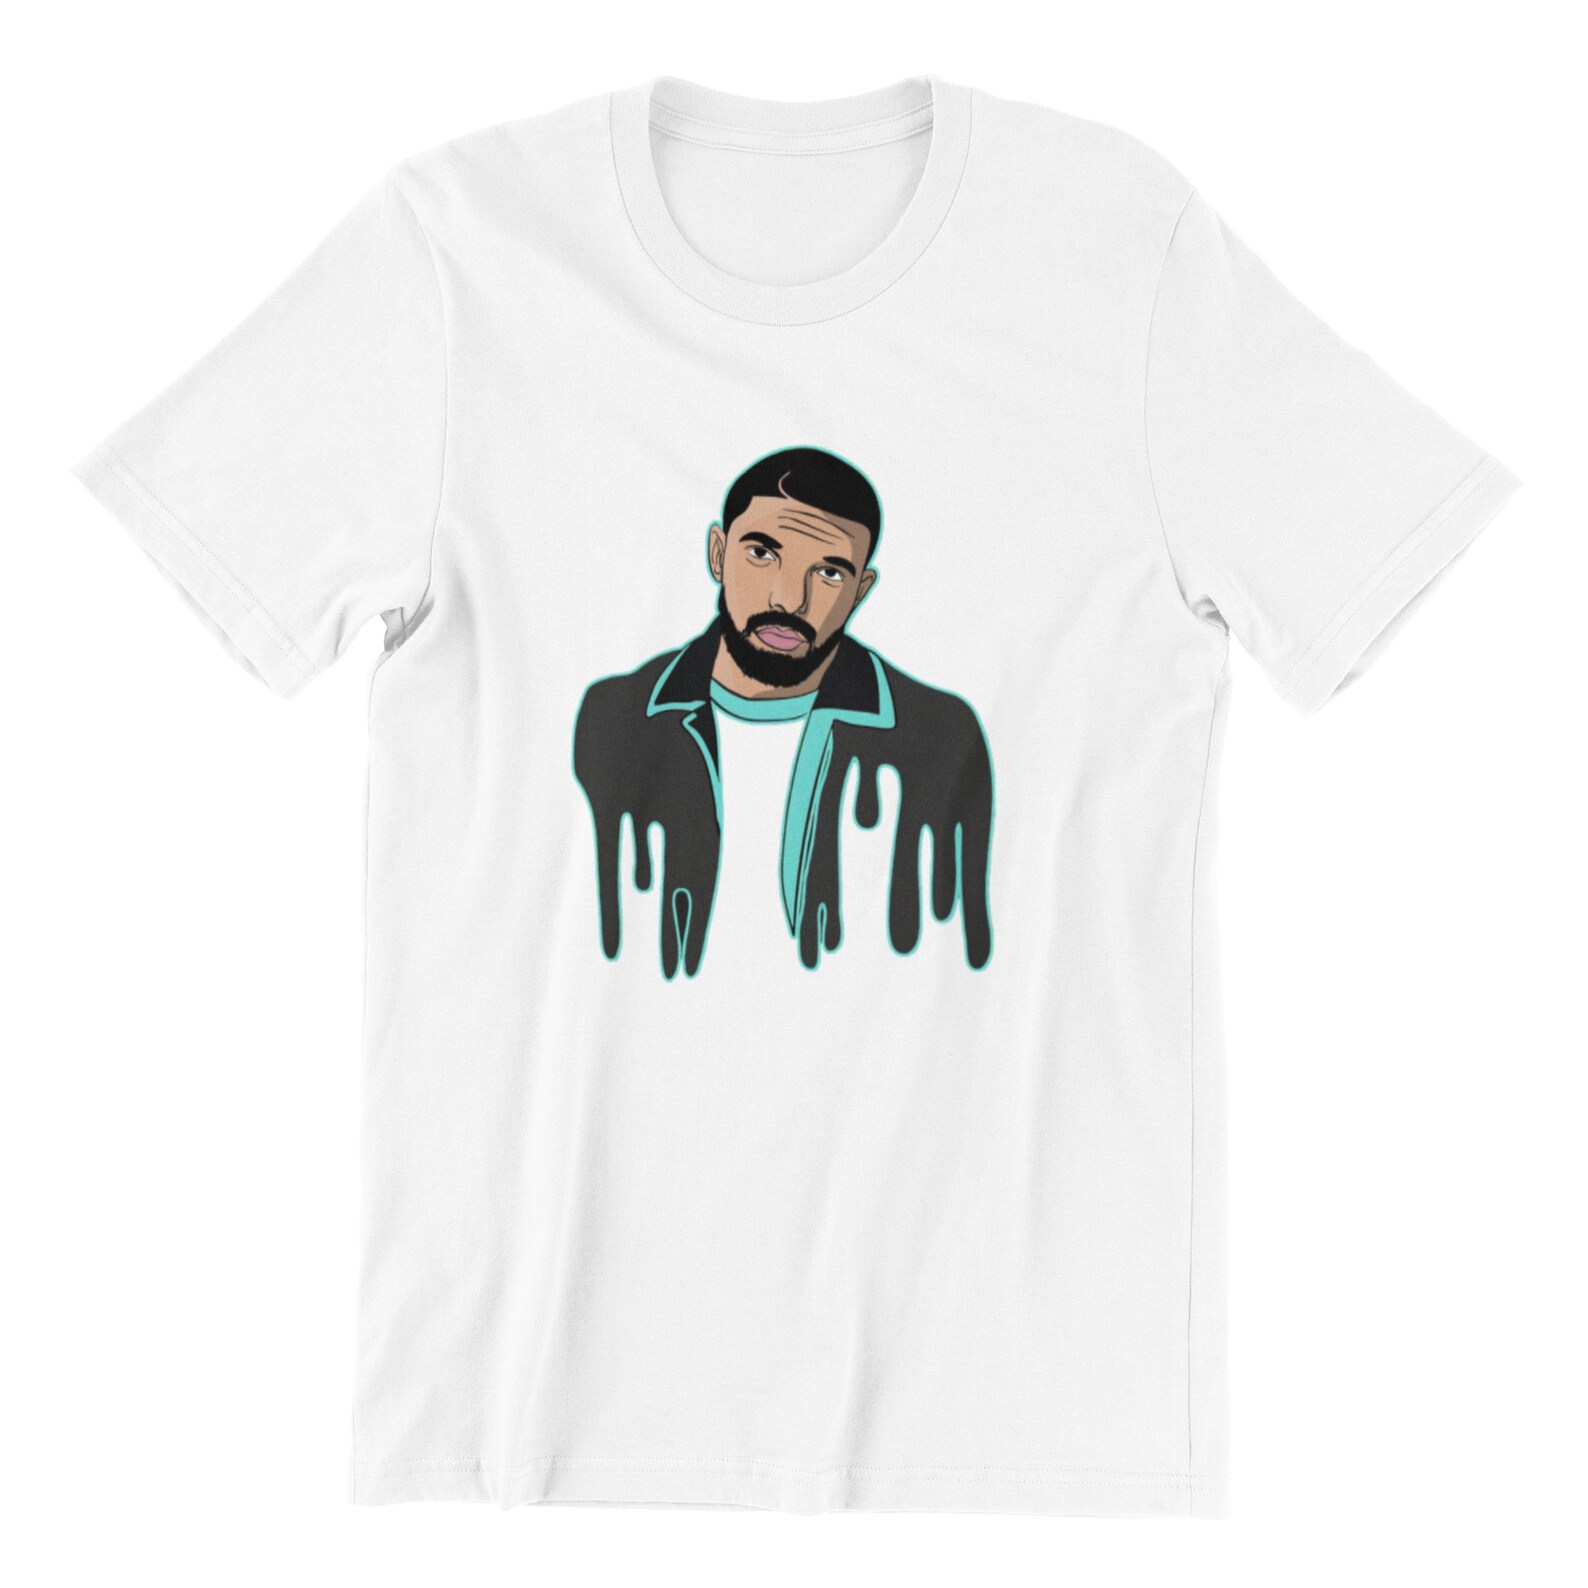 Drake Merch gifts graphic art tee shirt poster album covers | Etsy